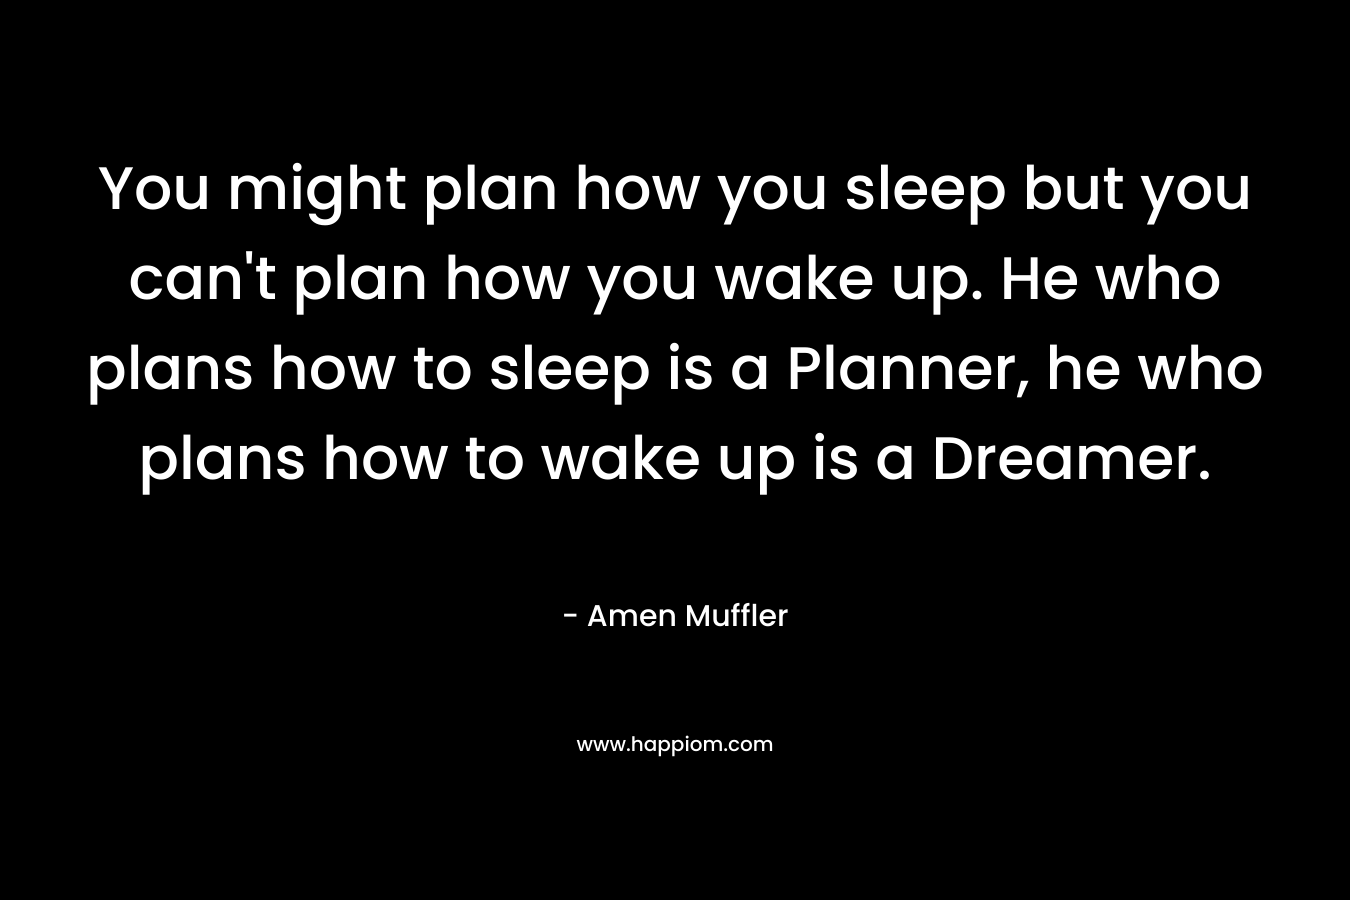 You might plan how you sleep but you can't plan how you wake up. He who plans how to sleep is a Planner, he who plans how to wake up is a Dreamer.